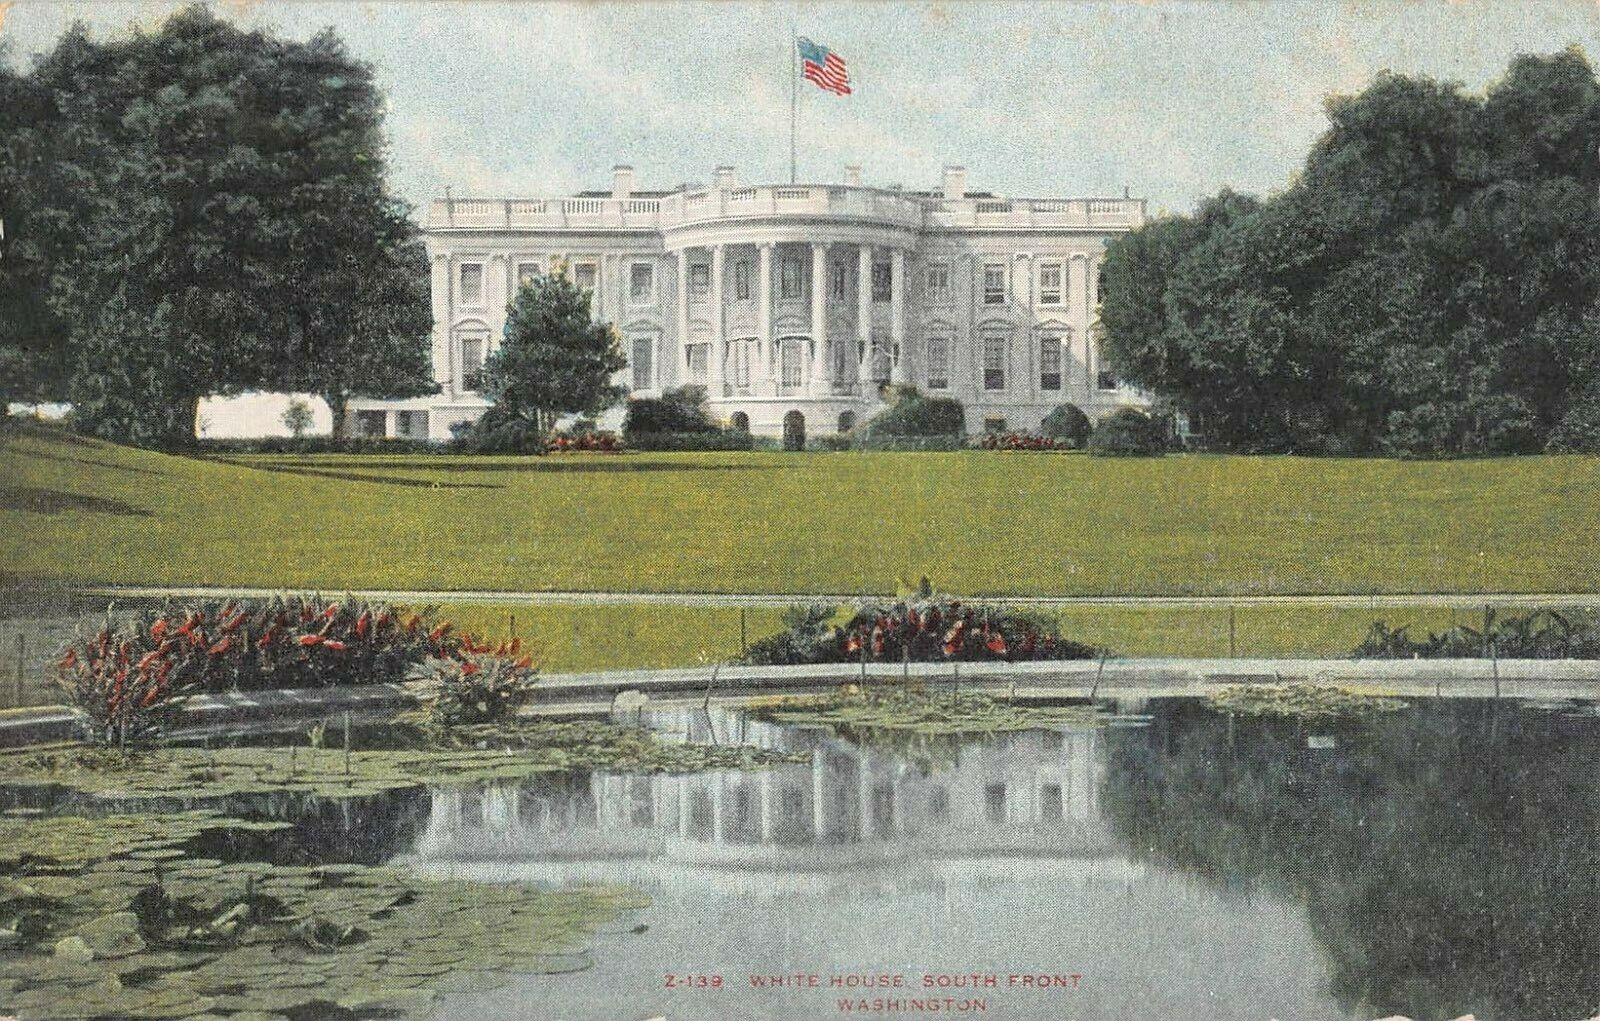 White House, South Front, Washington, D.C., Early Postcard, Unused